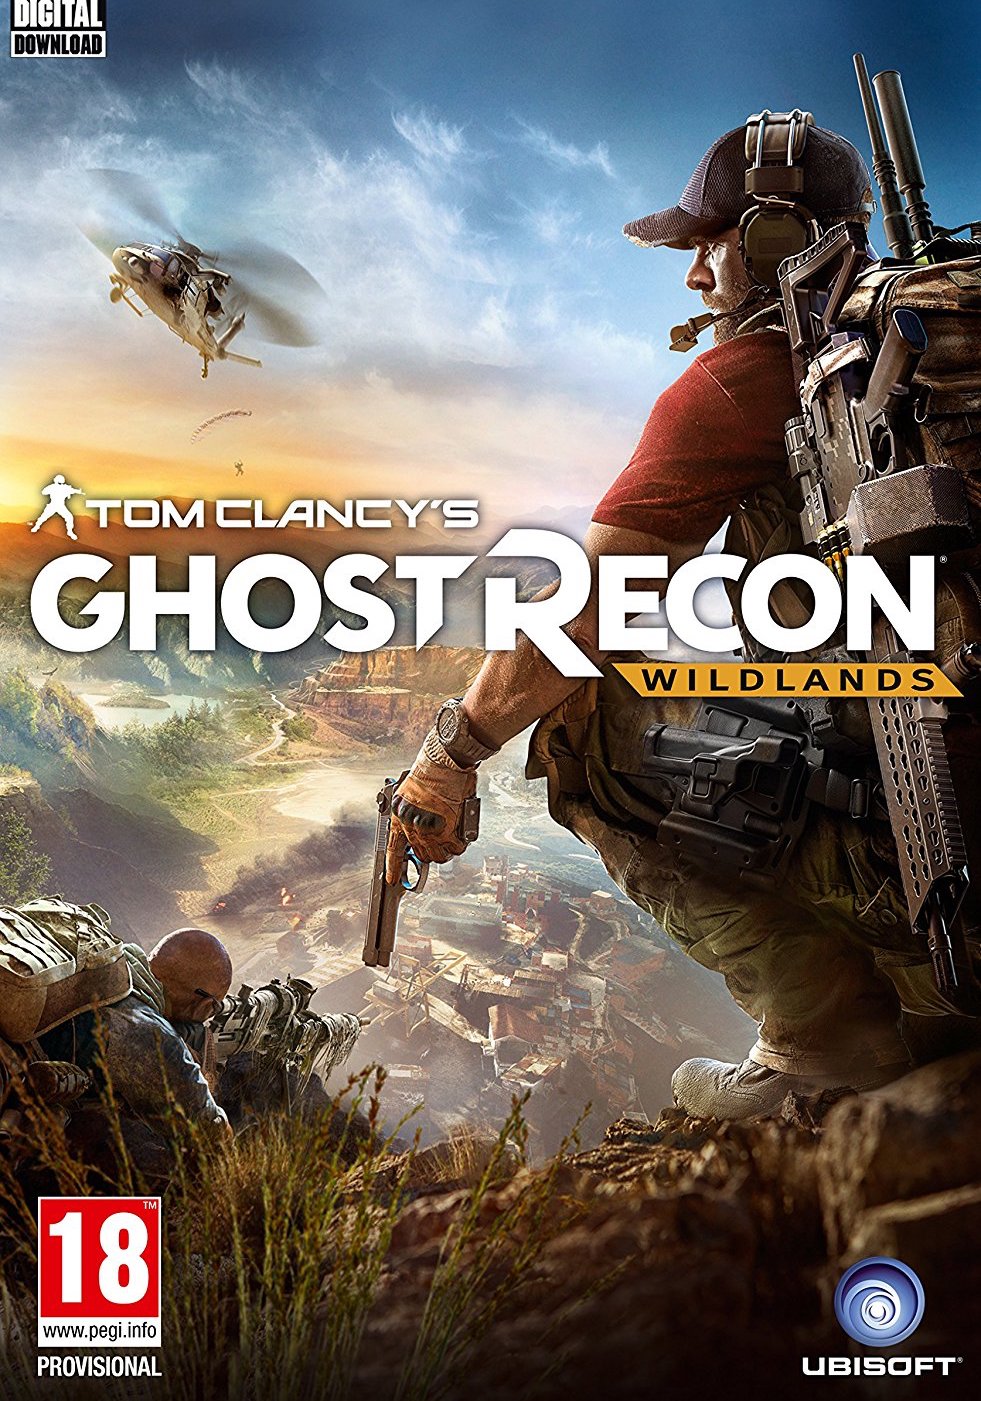 Tom Clancy's Ghost Recon Wildlands CD Key For Uplay: Standard Edition - 